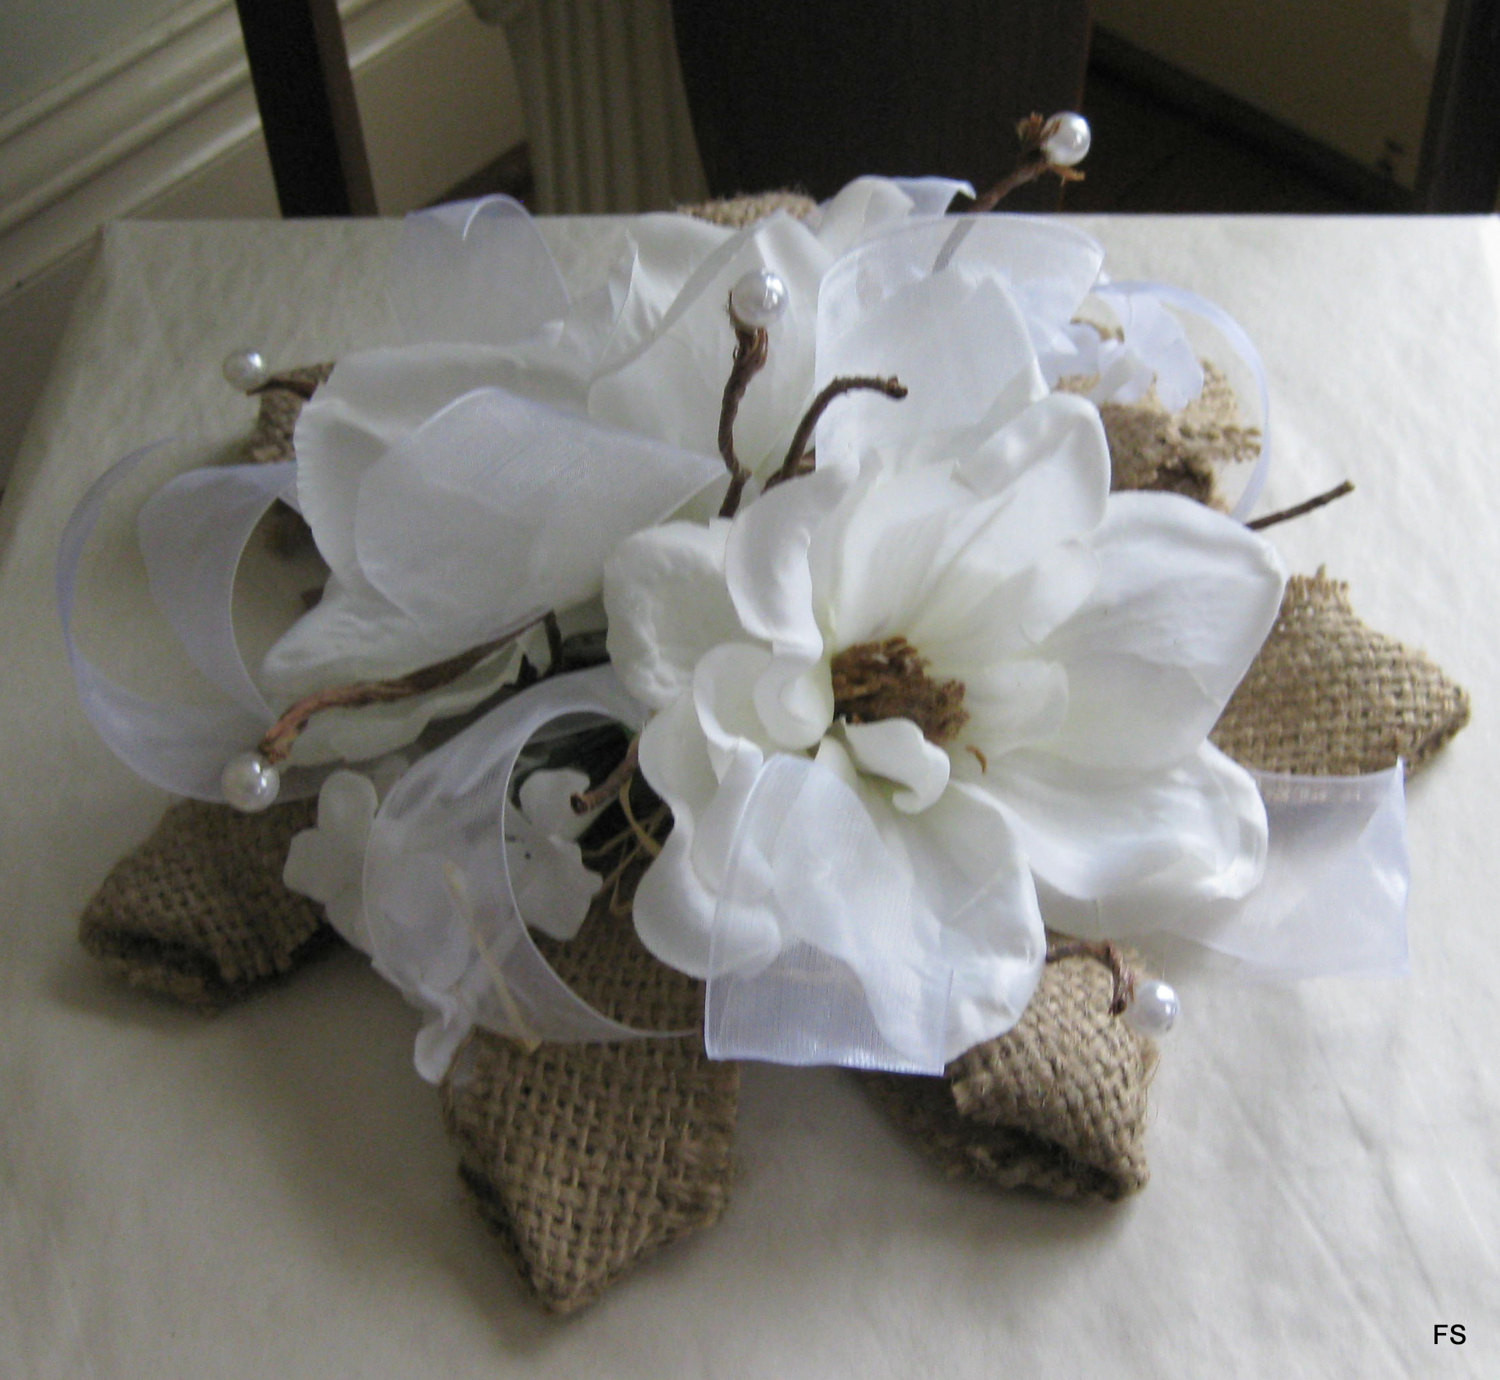 Gift Wrapping Ideas For Wedding Shower
 Wedding Gift Ideas Toppers Gift Wrapping Ideas Bridal Shower